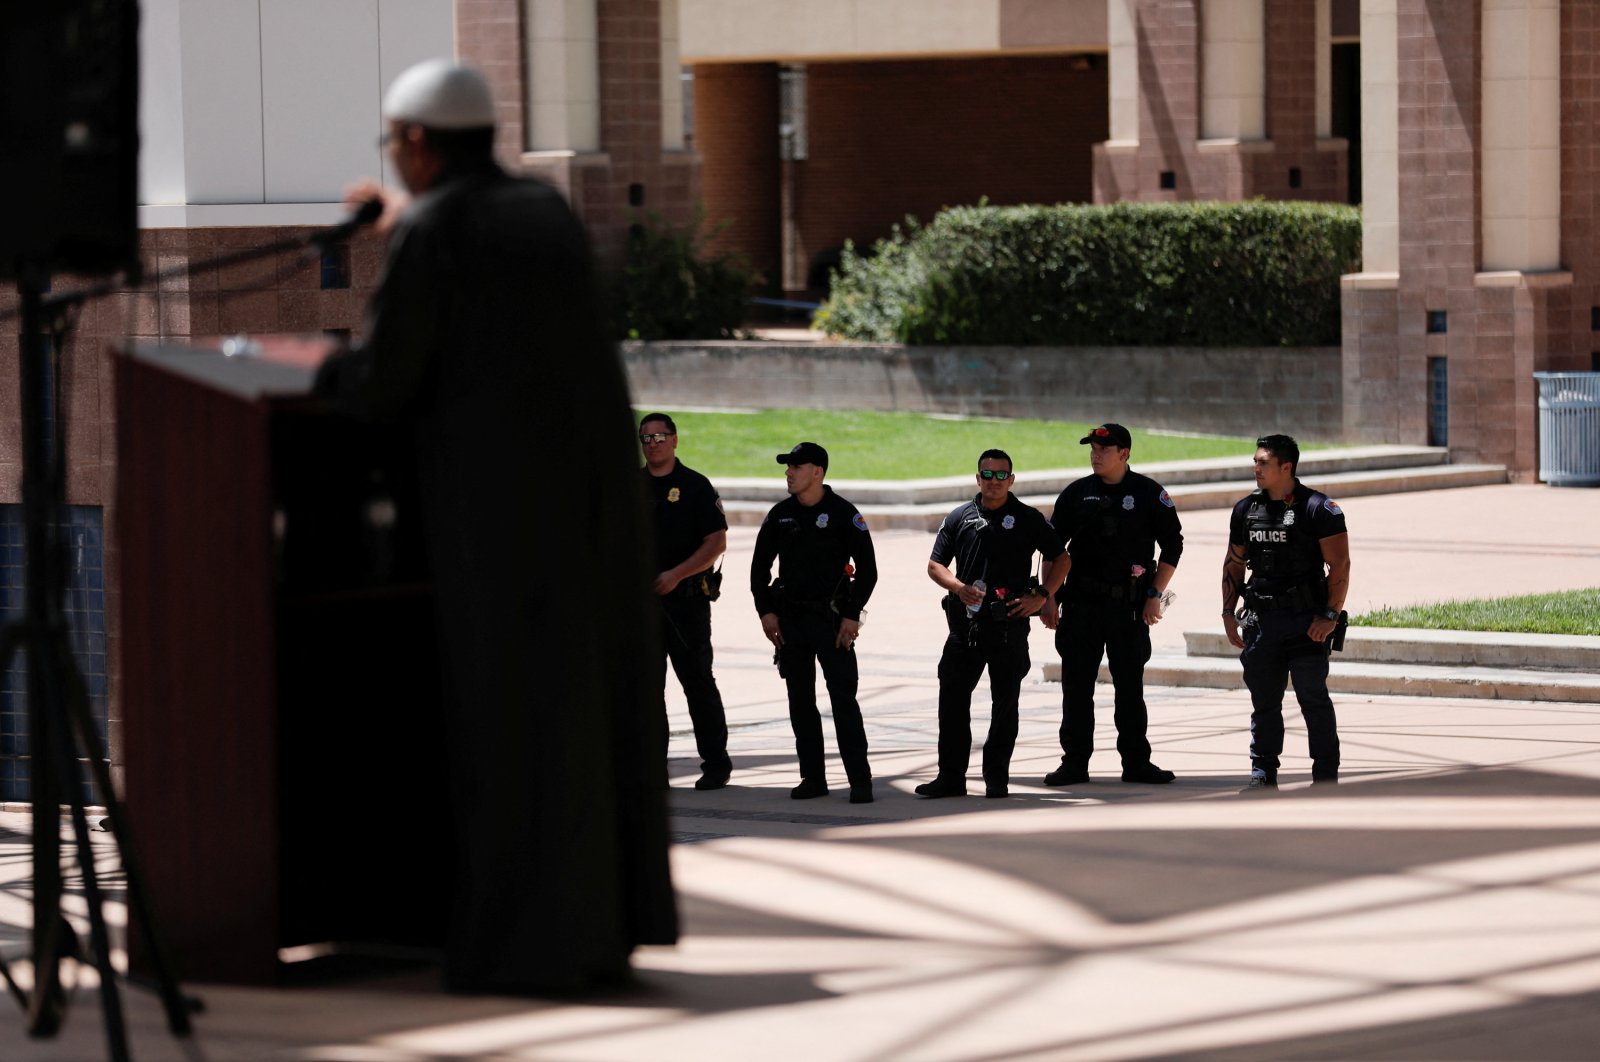 Members of the Albuquerque Police Department look on as Imam Dr. Mahmoud Eldenawi speaks at a unity event against anti-Shiite hate following the murders of four Muslim men in Albuquerque, New Mexico, U.S., Aug. 12, 2022. (Reuters File Photo)